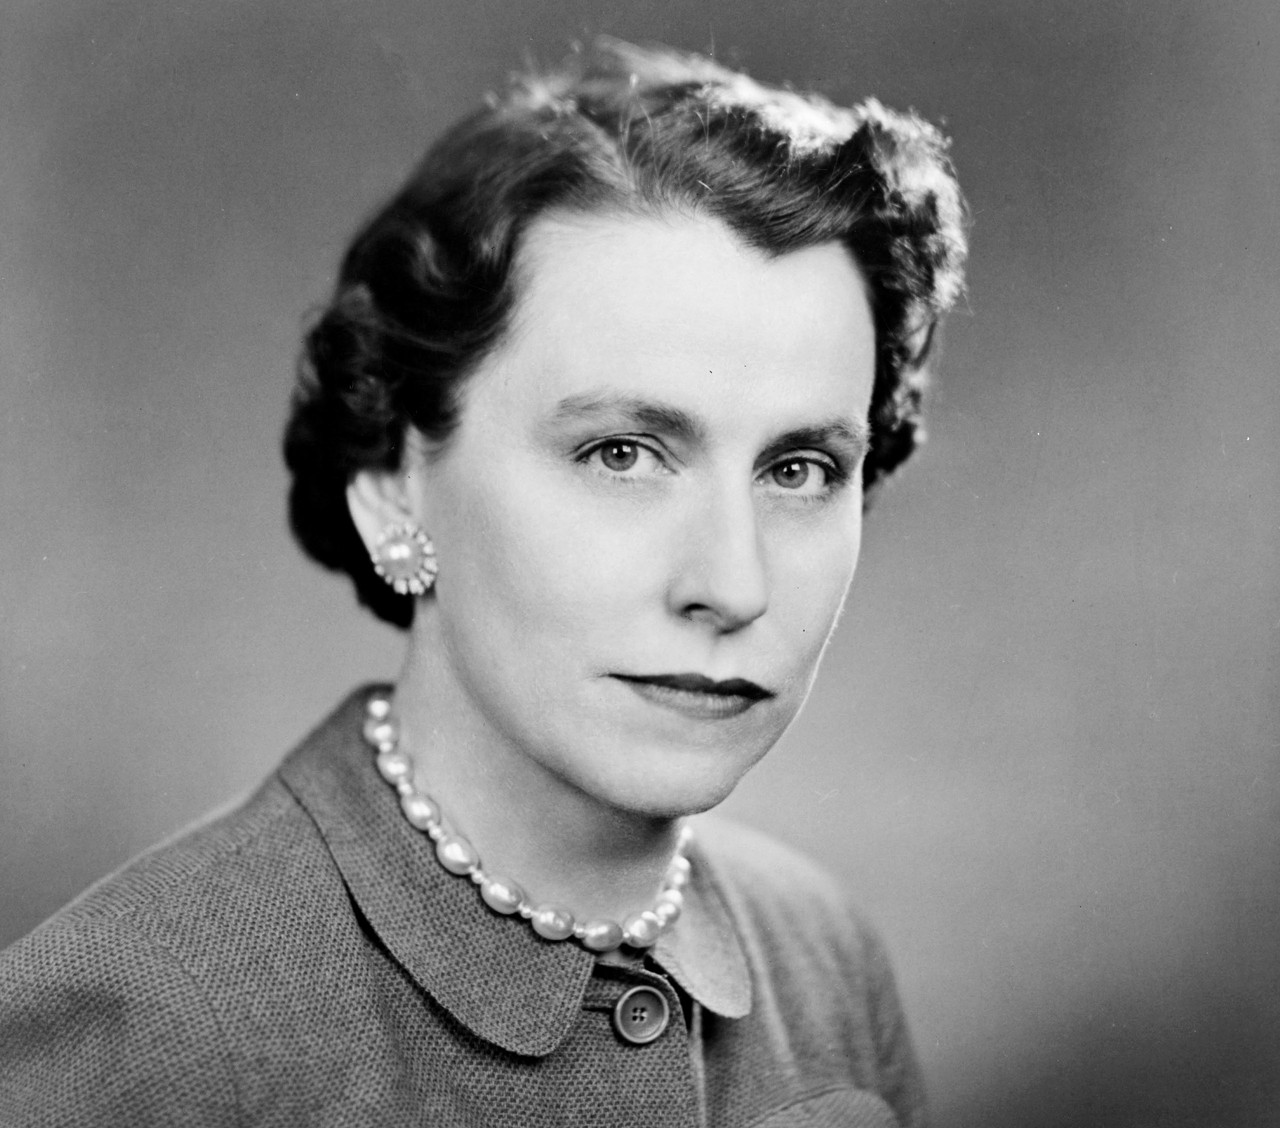 Martha Wright Griffiths was Lt. Governor.
The attorney and former U.S. Rep. was the first woman elected Lieutenant Governor of Michigan. (Republican Matilda Dodge Wilson was appointed the first female Lieutenant Governor of Michigan in 1939.)